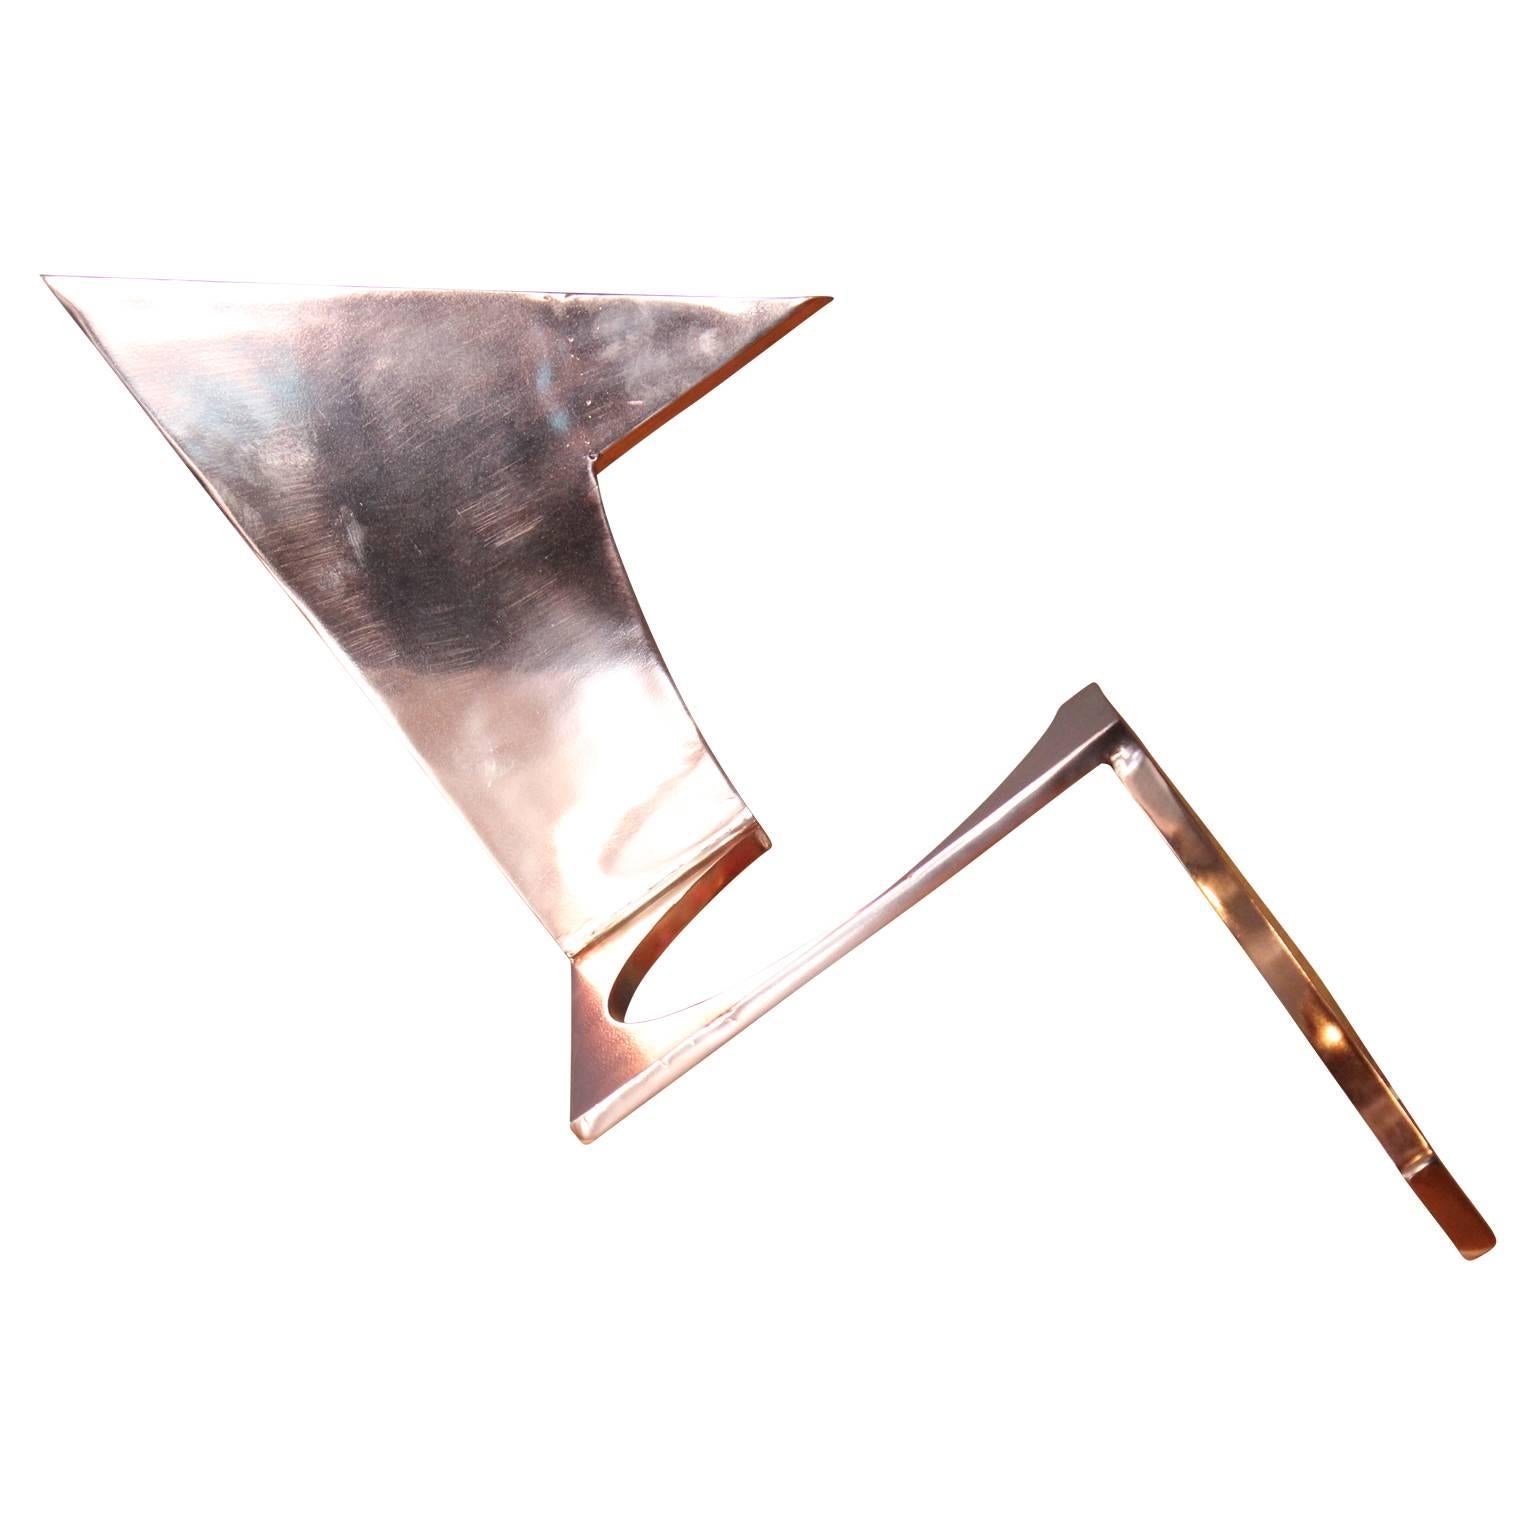 Geometrically shaped copper sculpture. The piece is the tone of shiny bright copper and has circular and triangular shapes to the work. It is not signed. 

Artist Biography: Matthew Reeves is the owner of Reeves Art & Design. He graduated from the